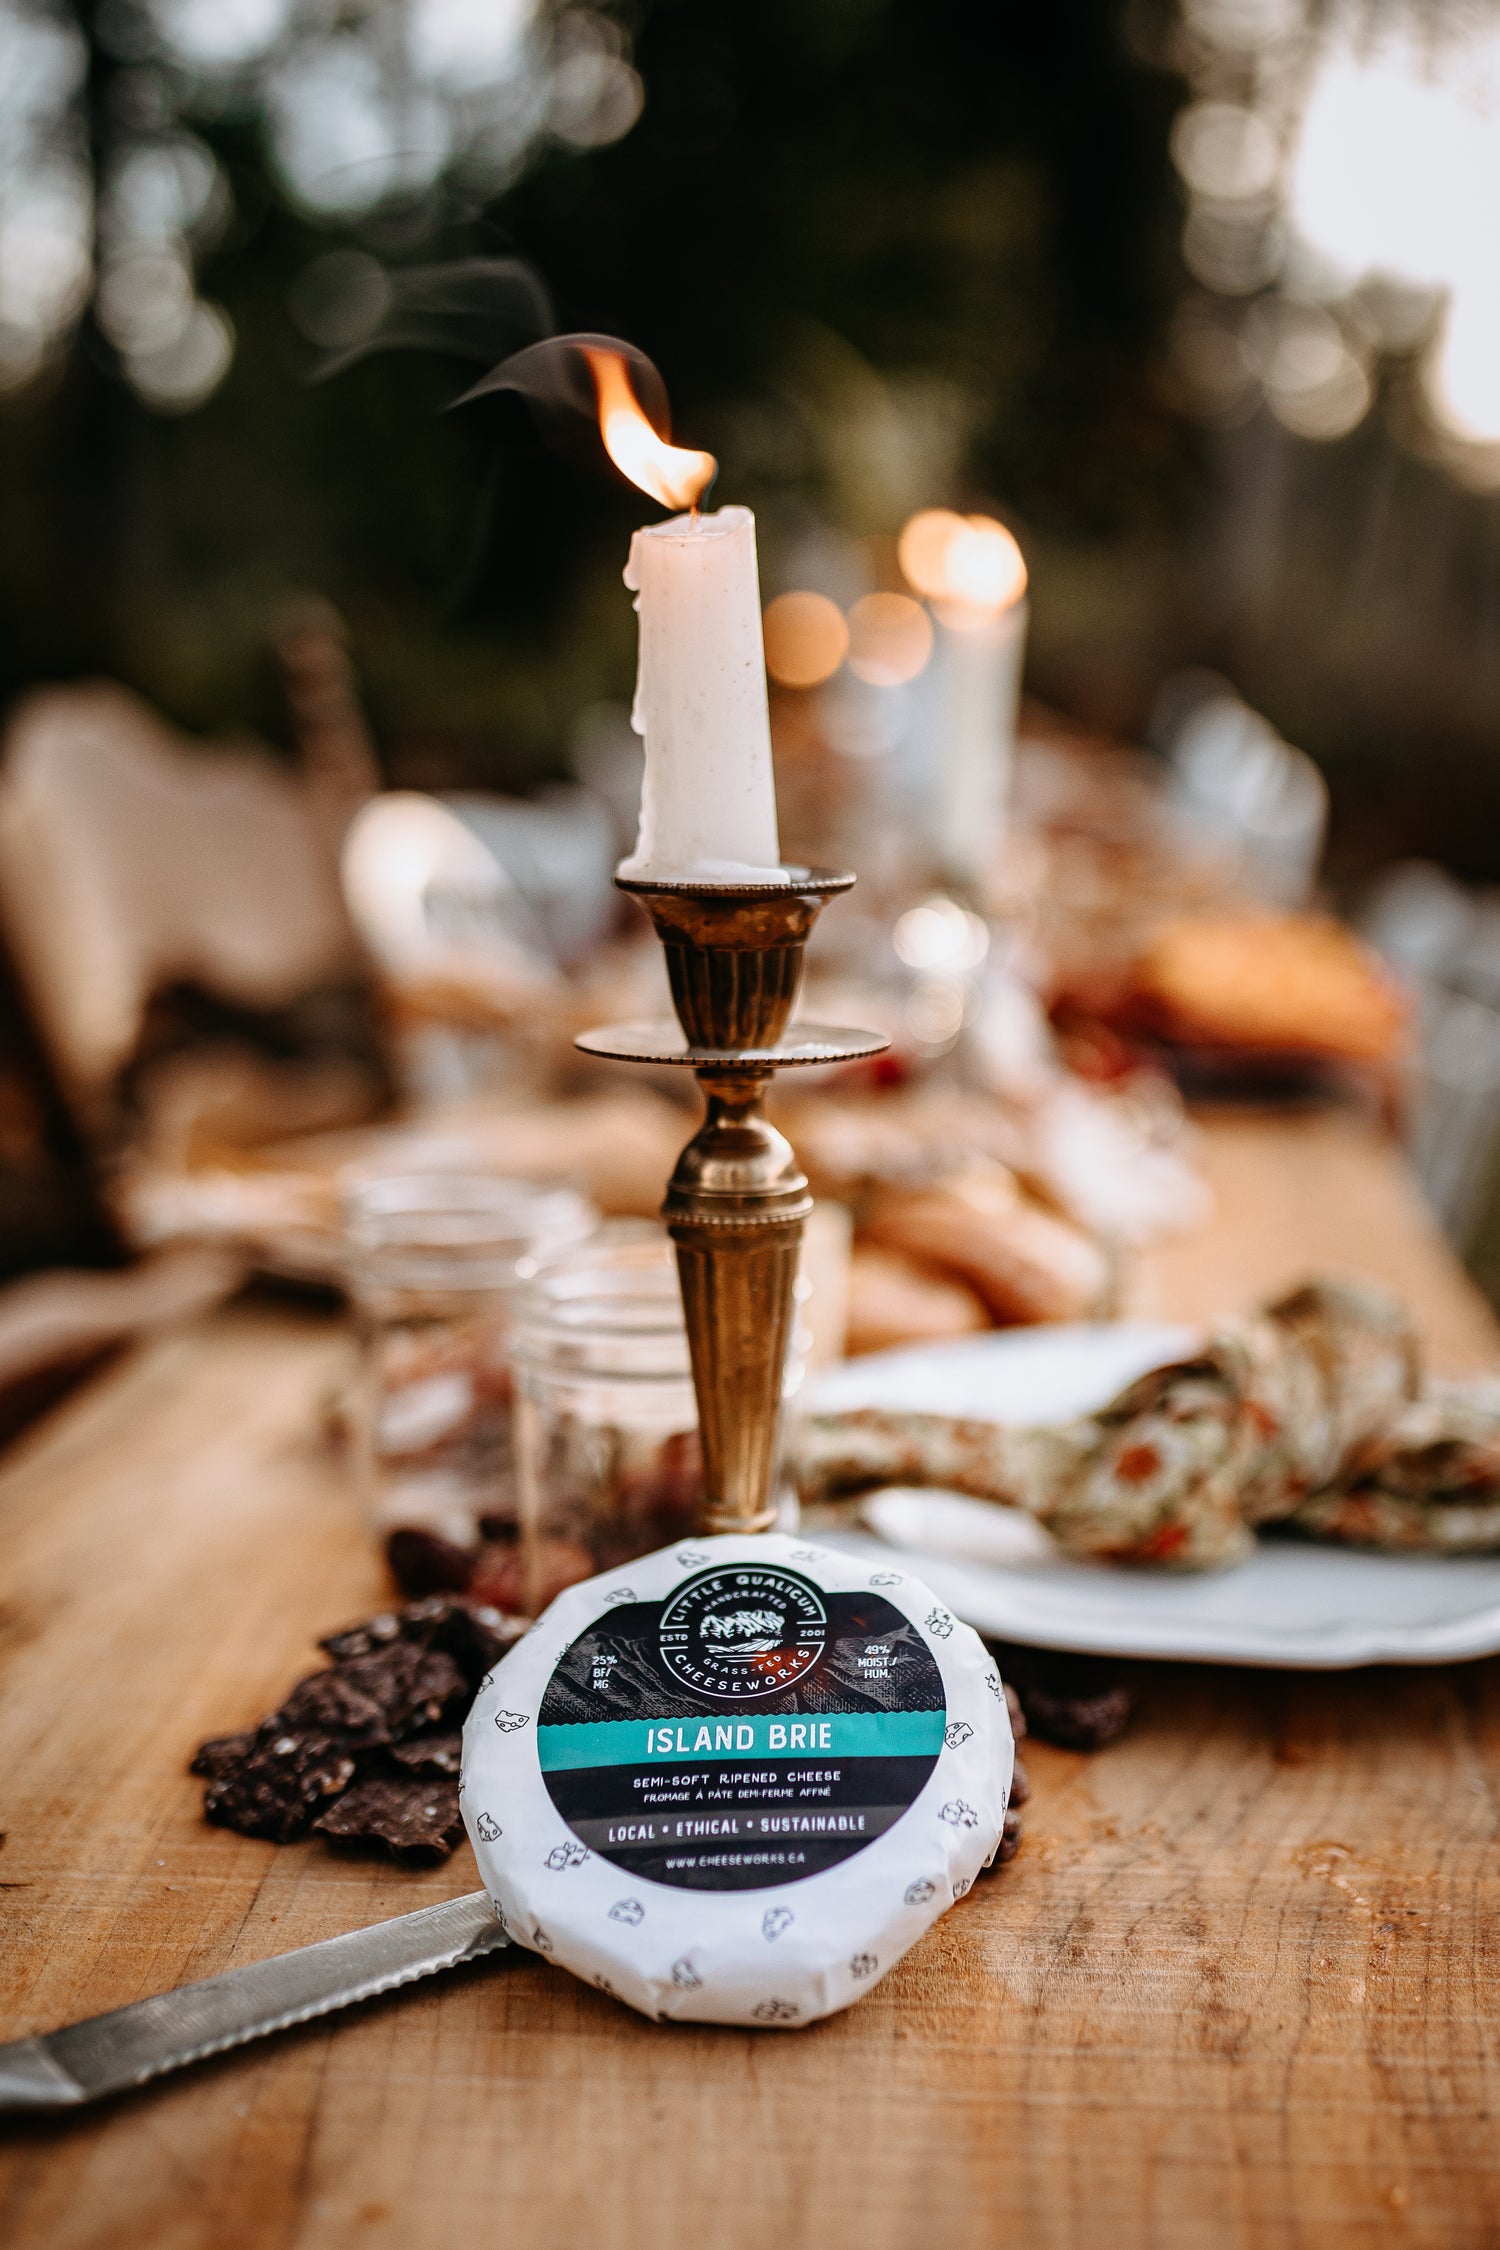 A package of Little Qualicum Cheeseworks' Island Brie sits at the end of a long dinner table set for a feast.